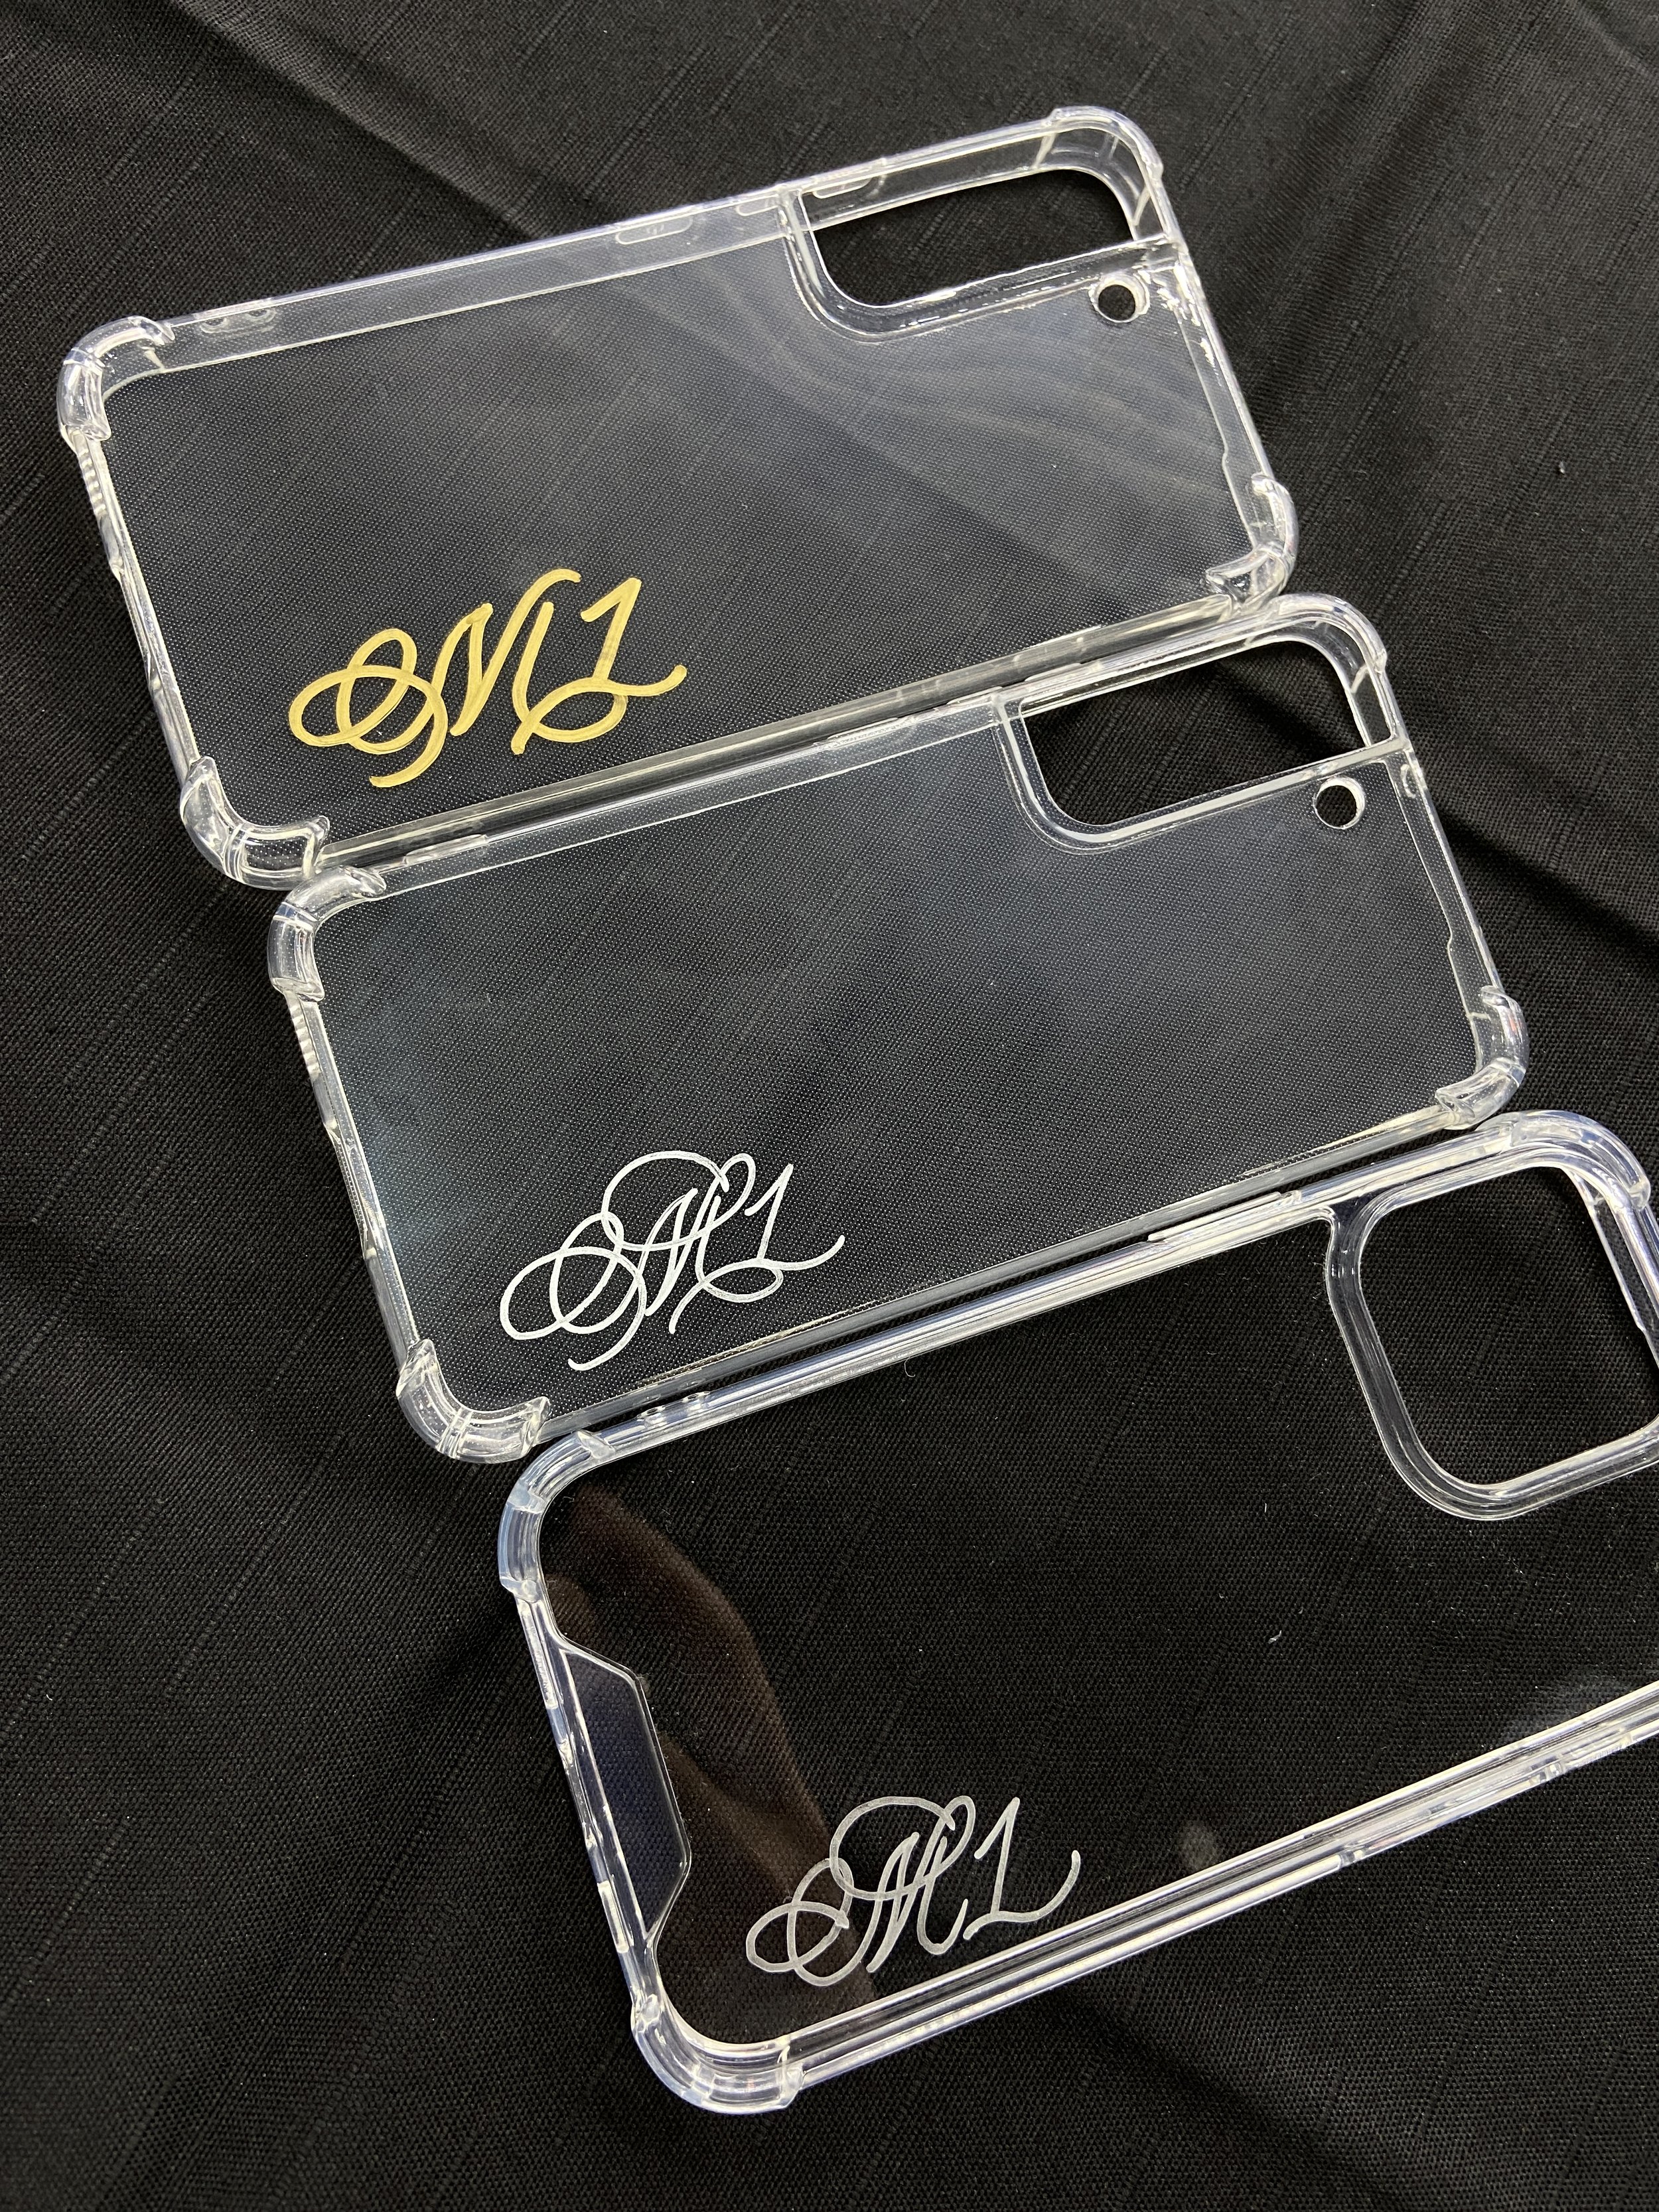 M1 Phone Cover Calligraphy & Lettering Customisation Live Event 16.JPG